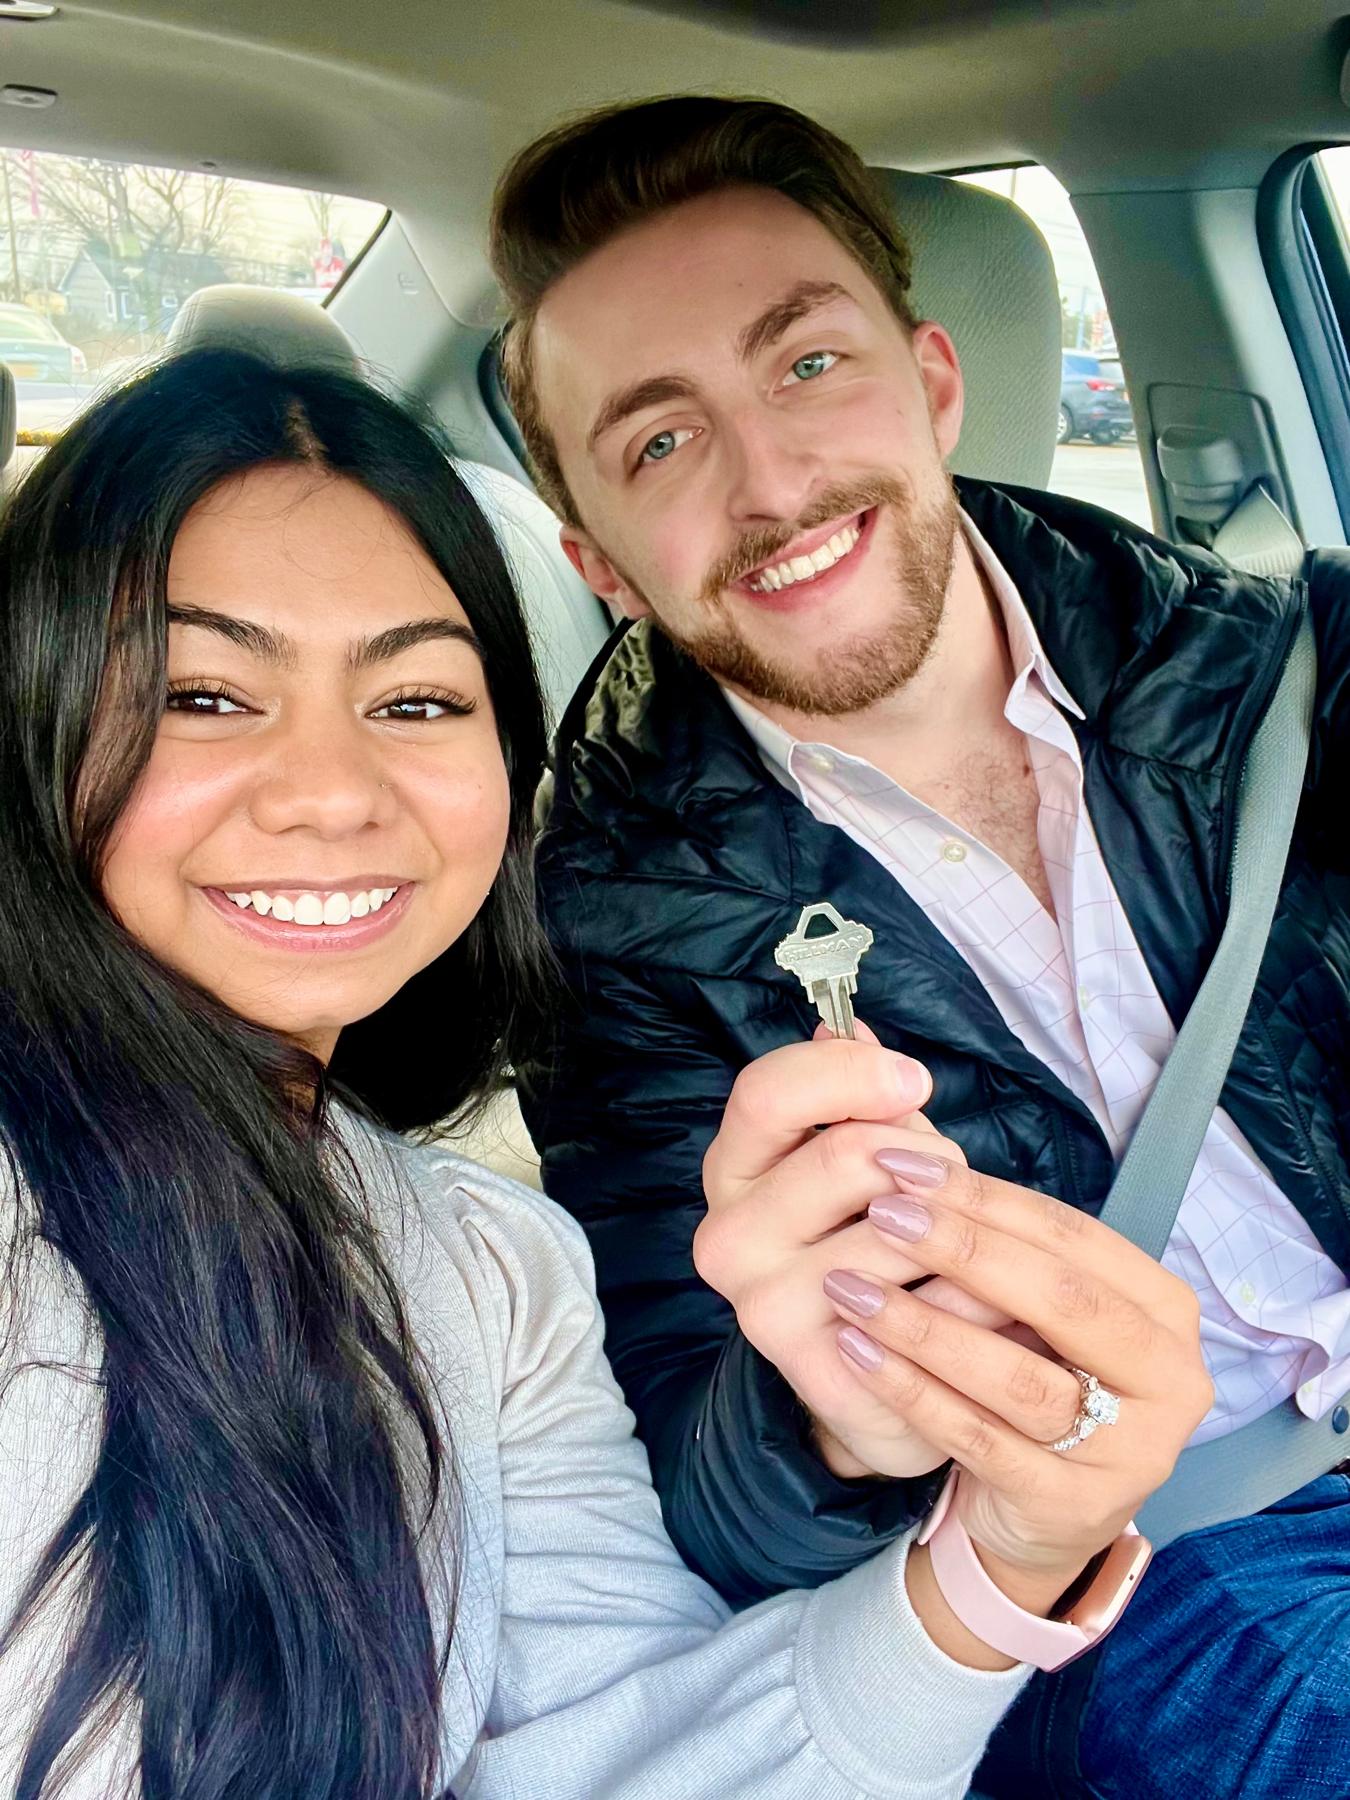 The day we bought our house officially!